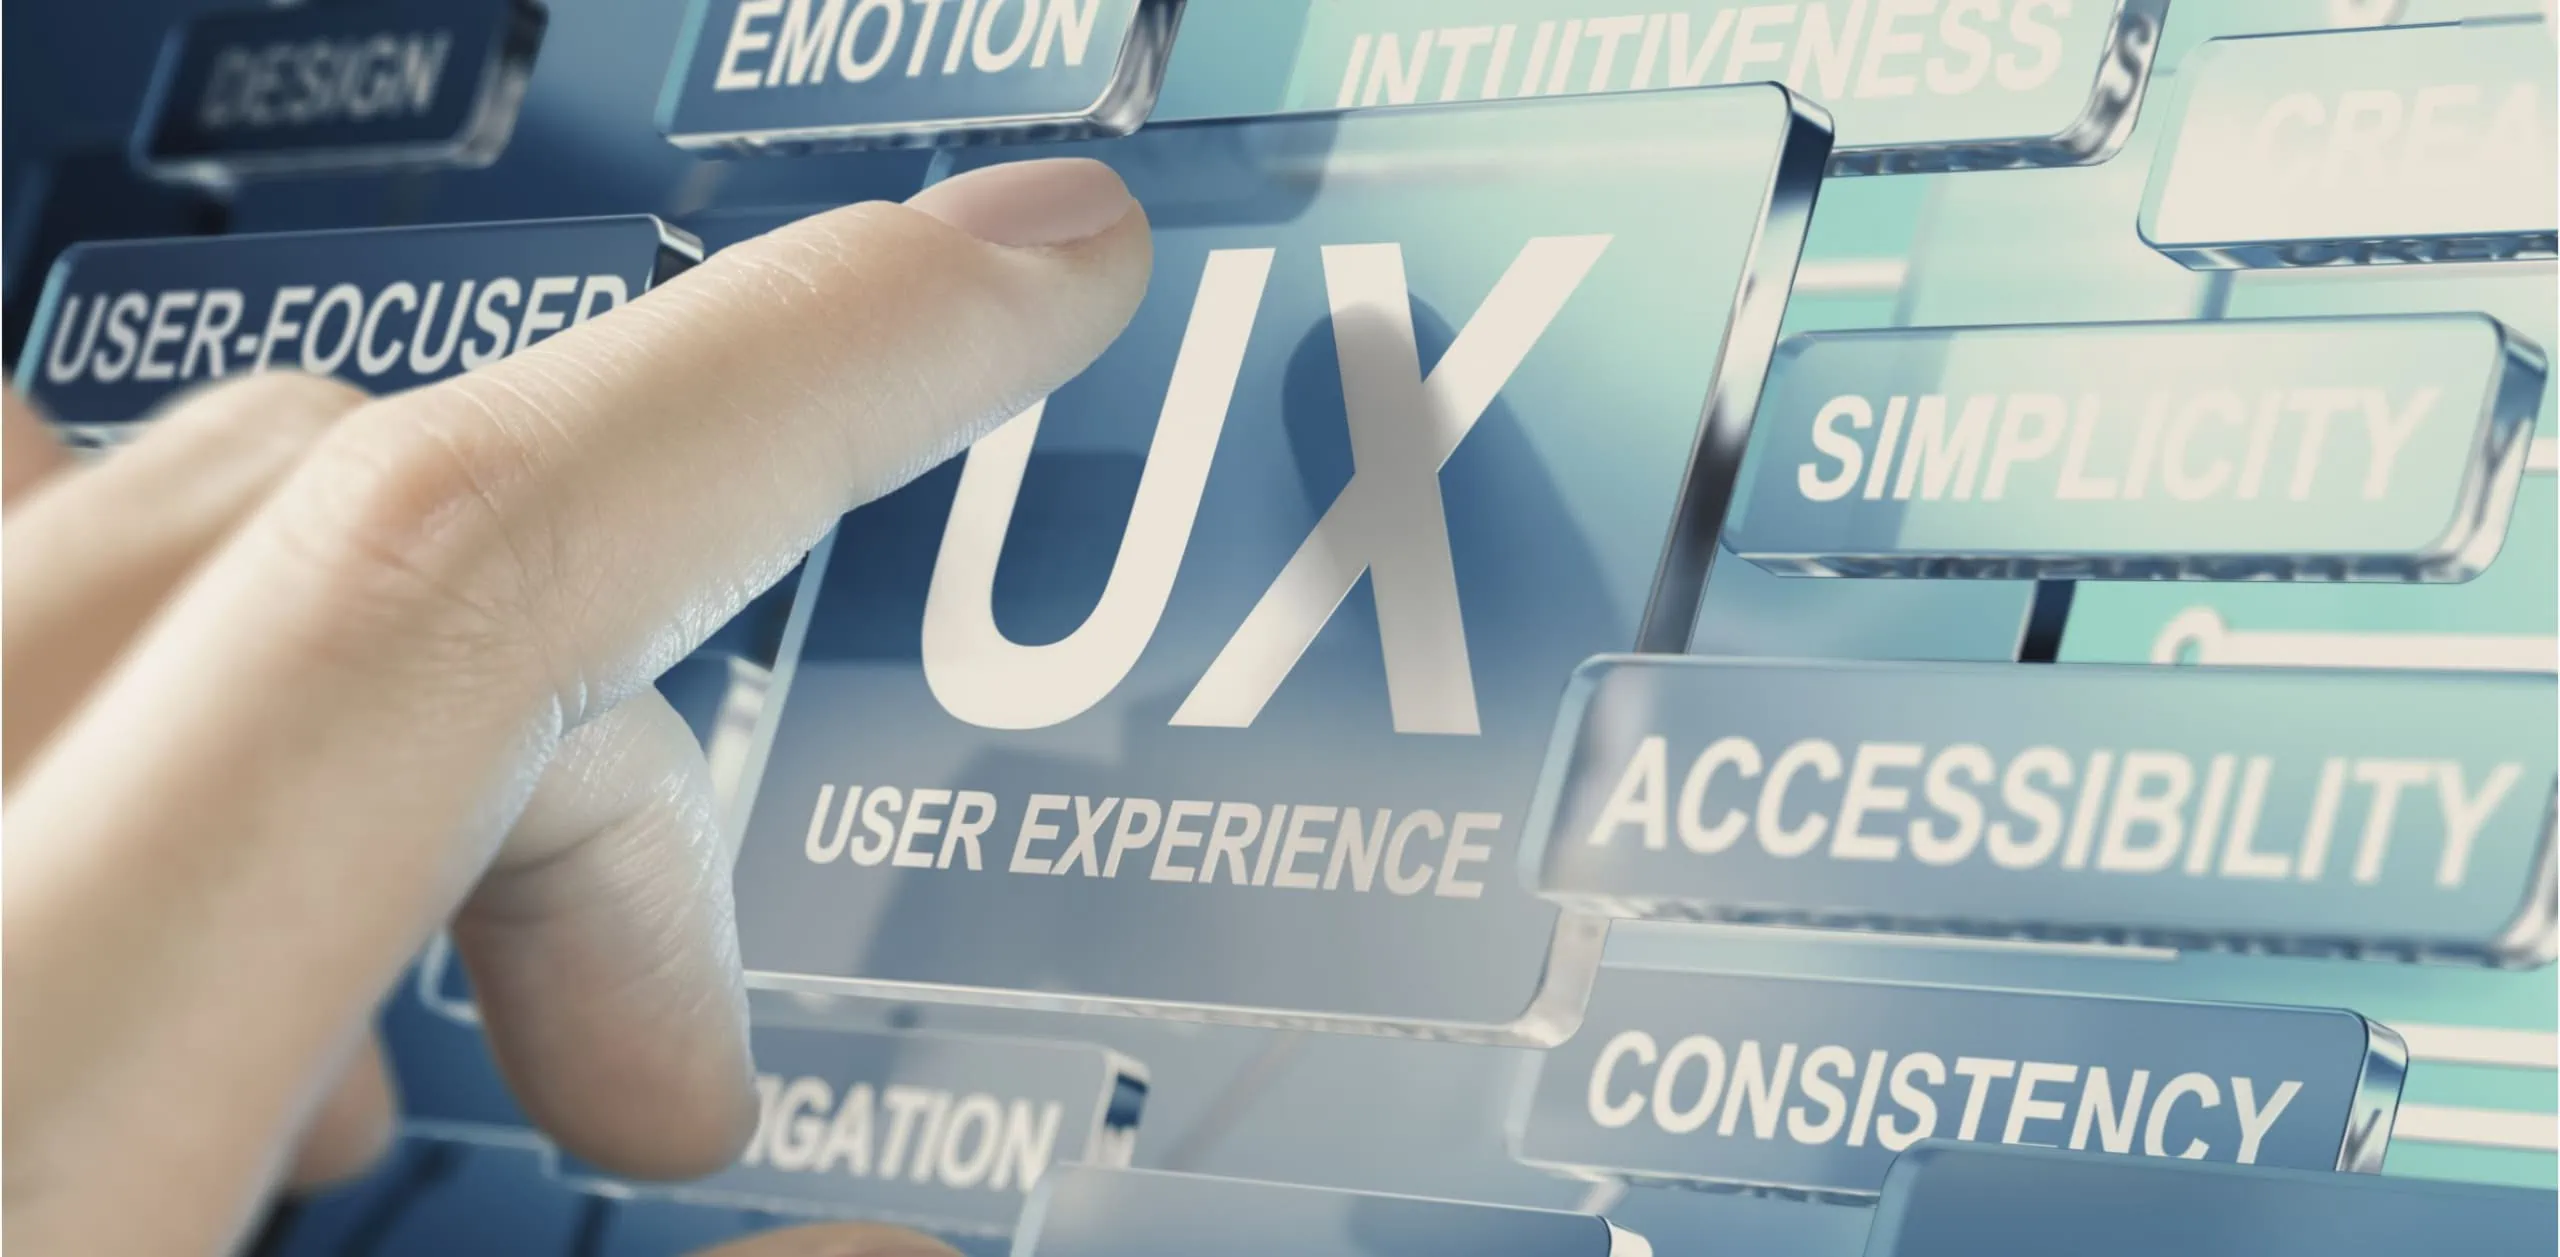 6 of the e-commerce UX best practices